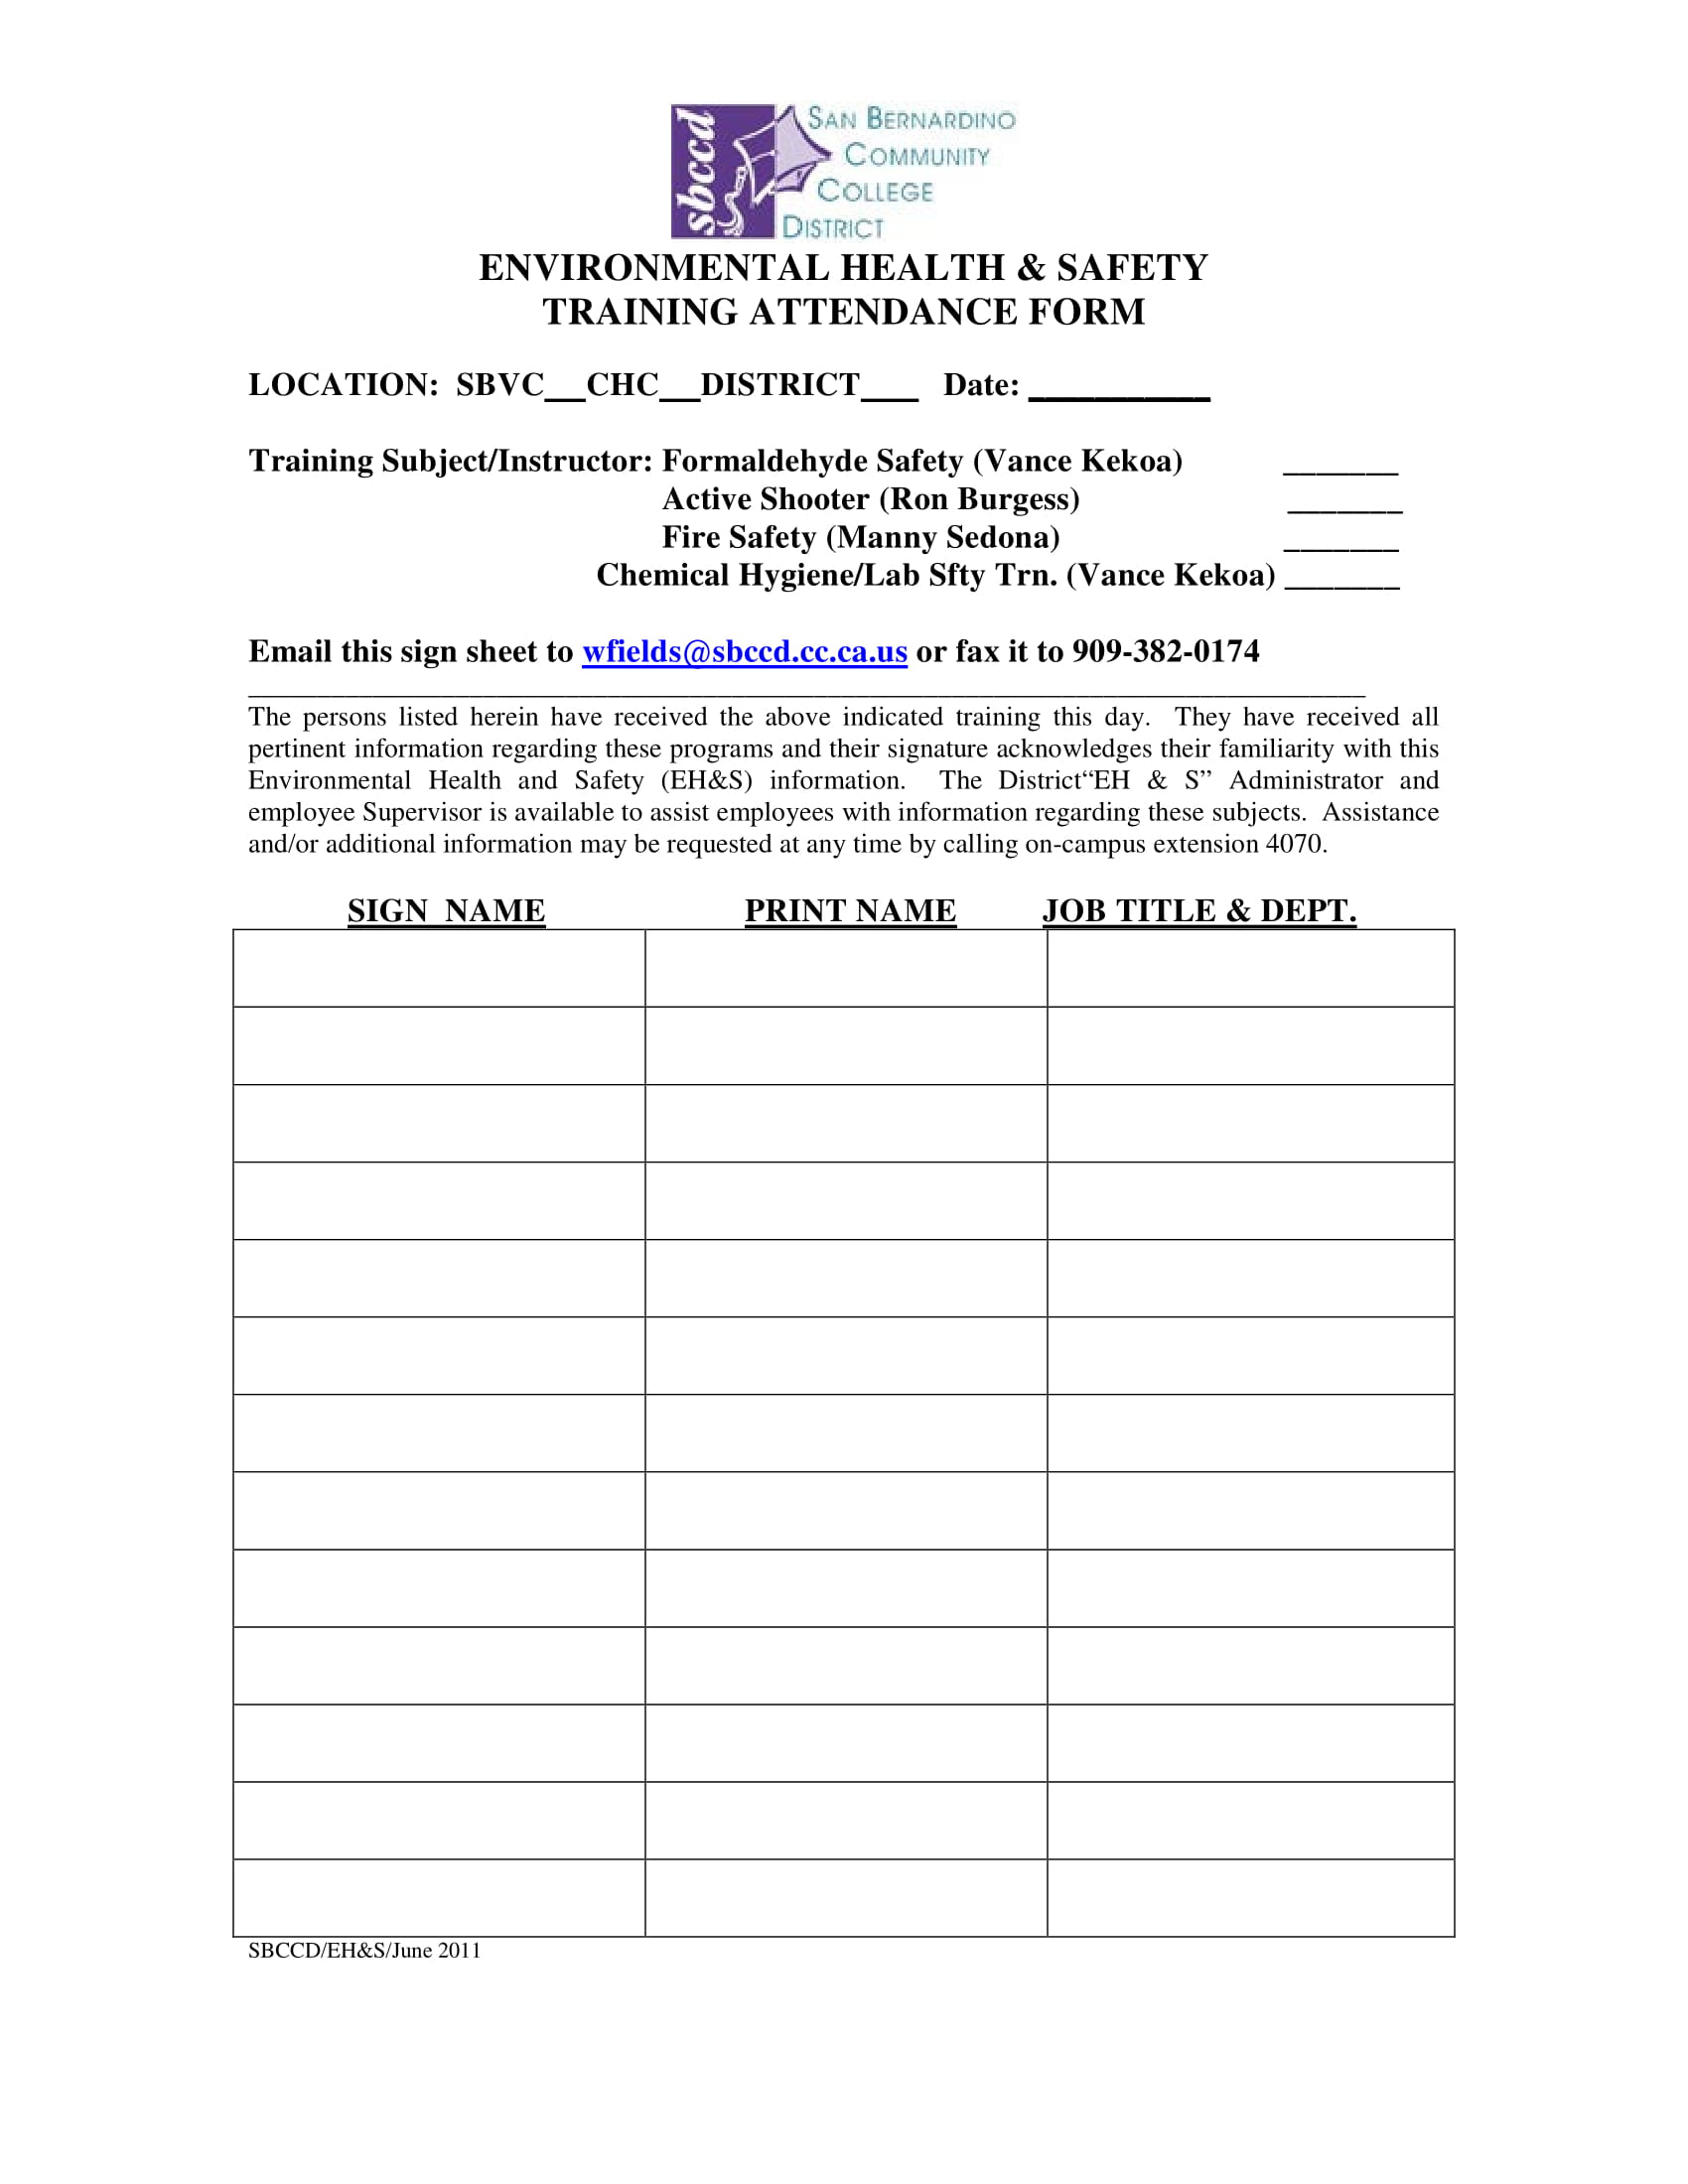 environmental health and safety employee training attendance form